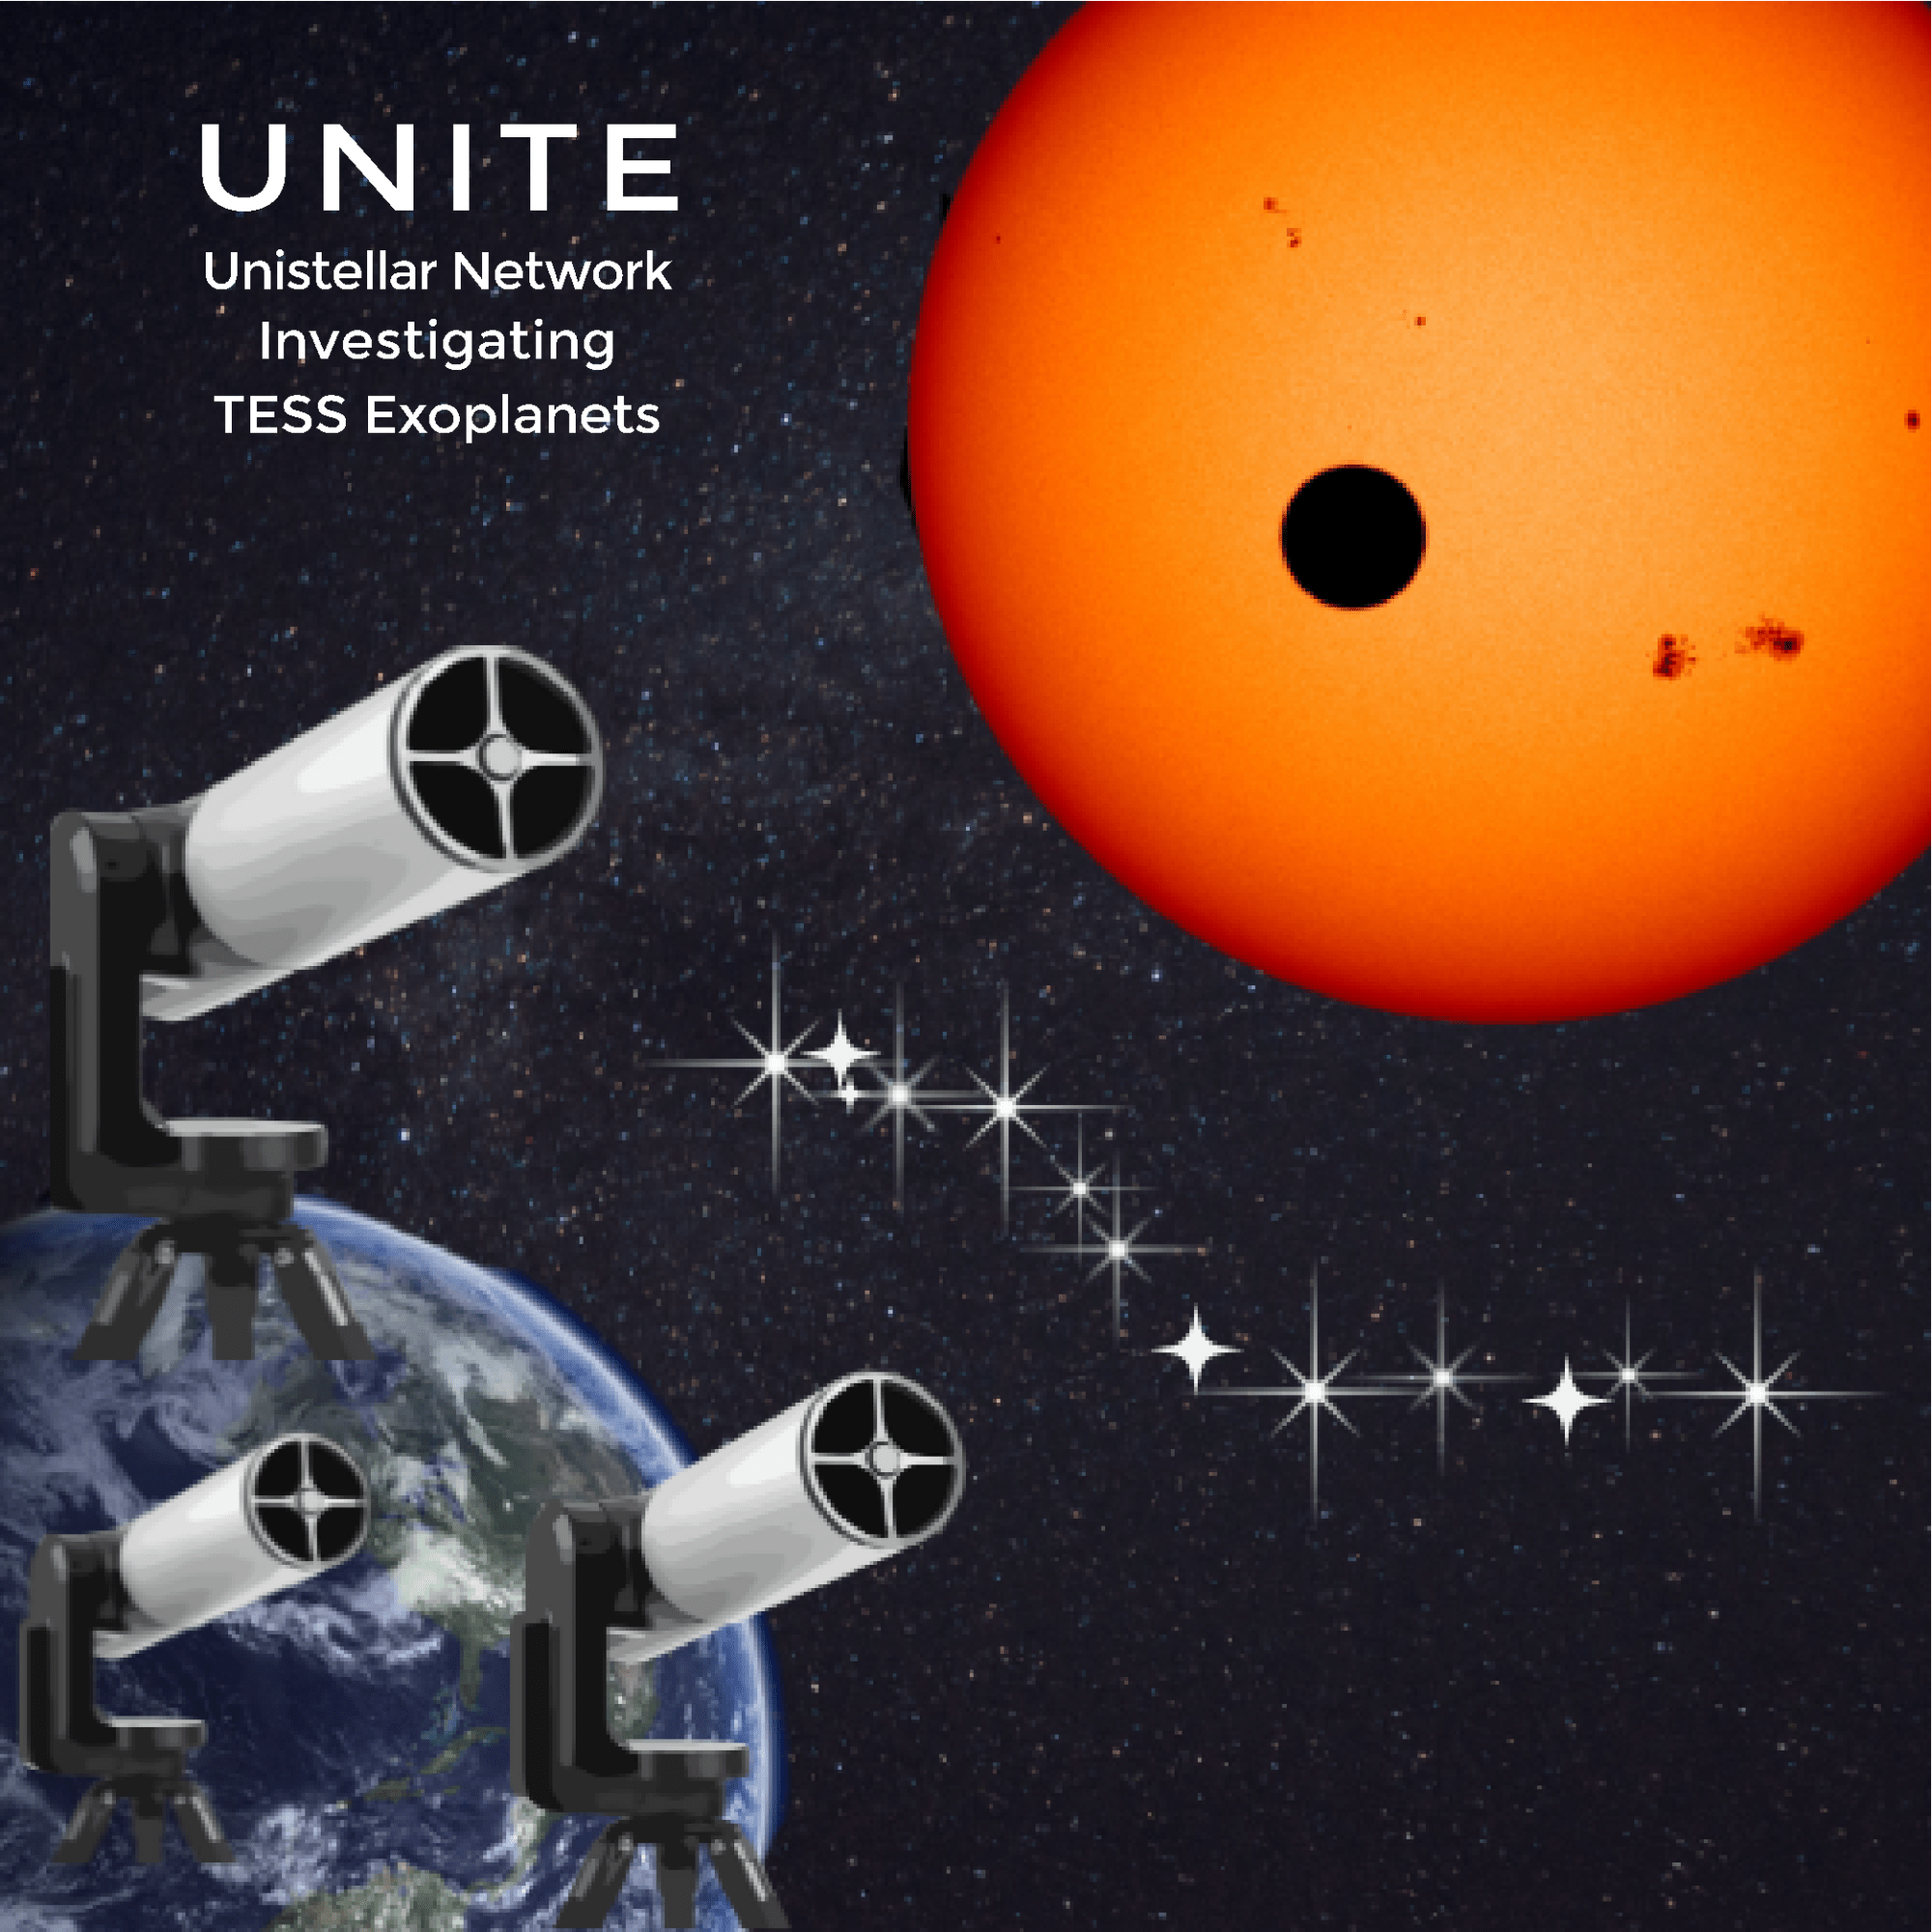 Square image with a bright orange sun in the upper right corner, the earth in the lower left corner with 3 telescopes floating around it and the title reads UNITE Unistellar Network Investigating TESS Exoplanets